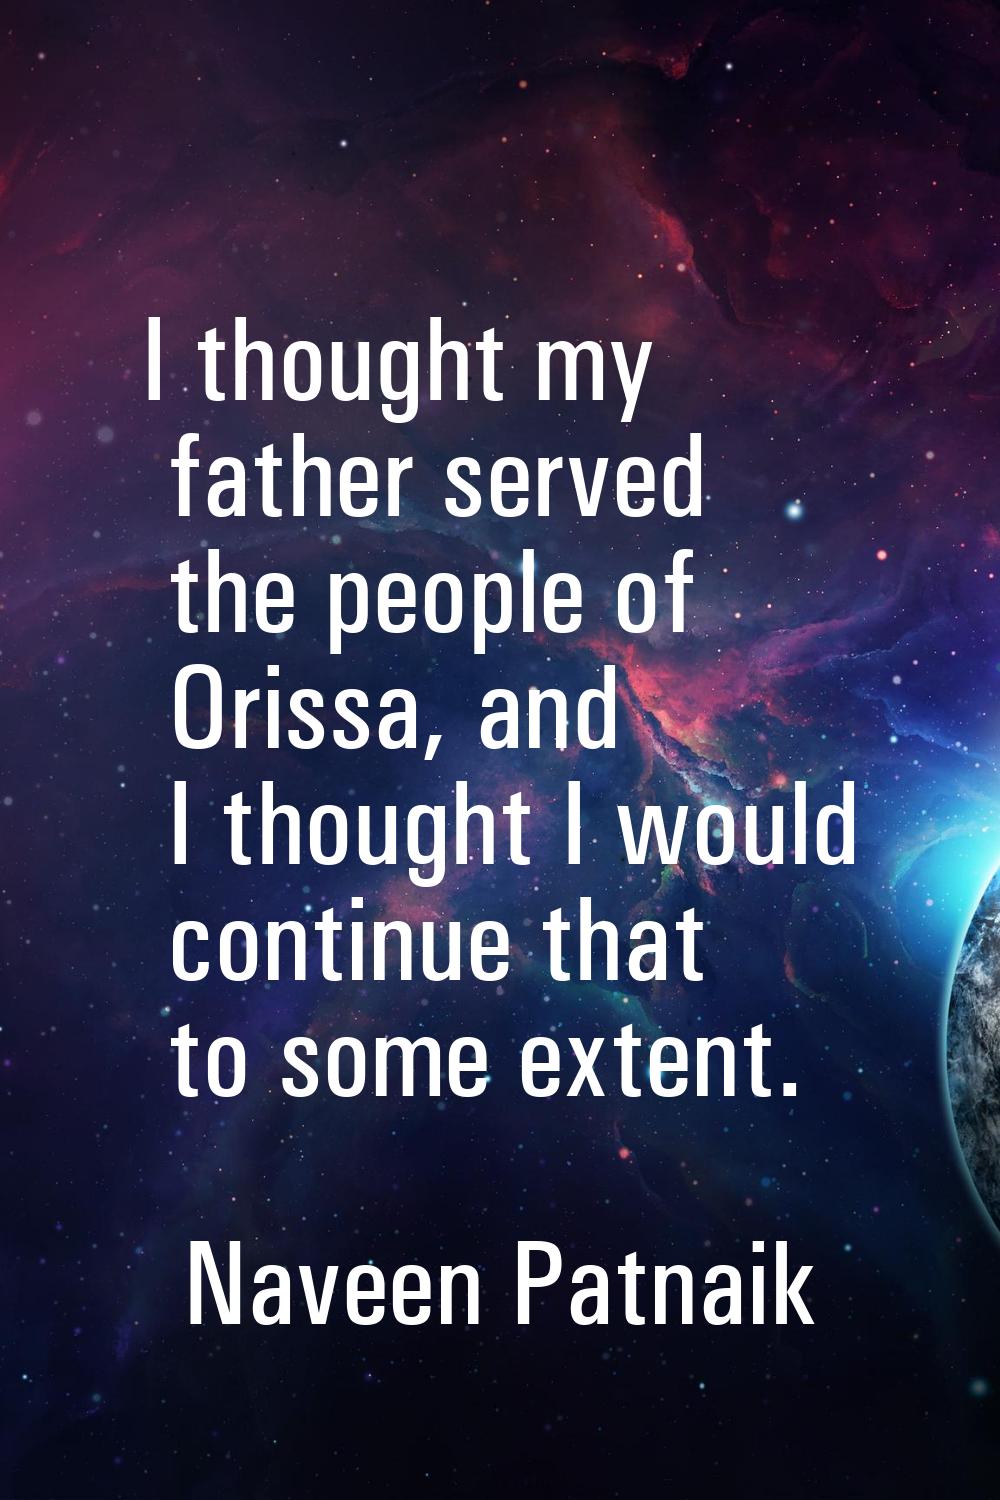 I thought my father served the people of Orissa, and I thought I would continue that to some extent